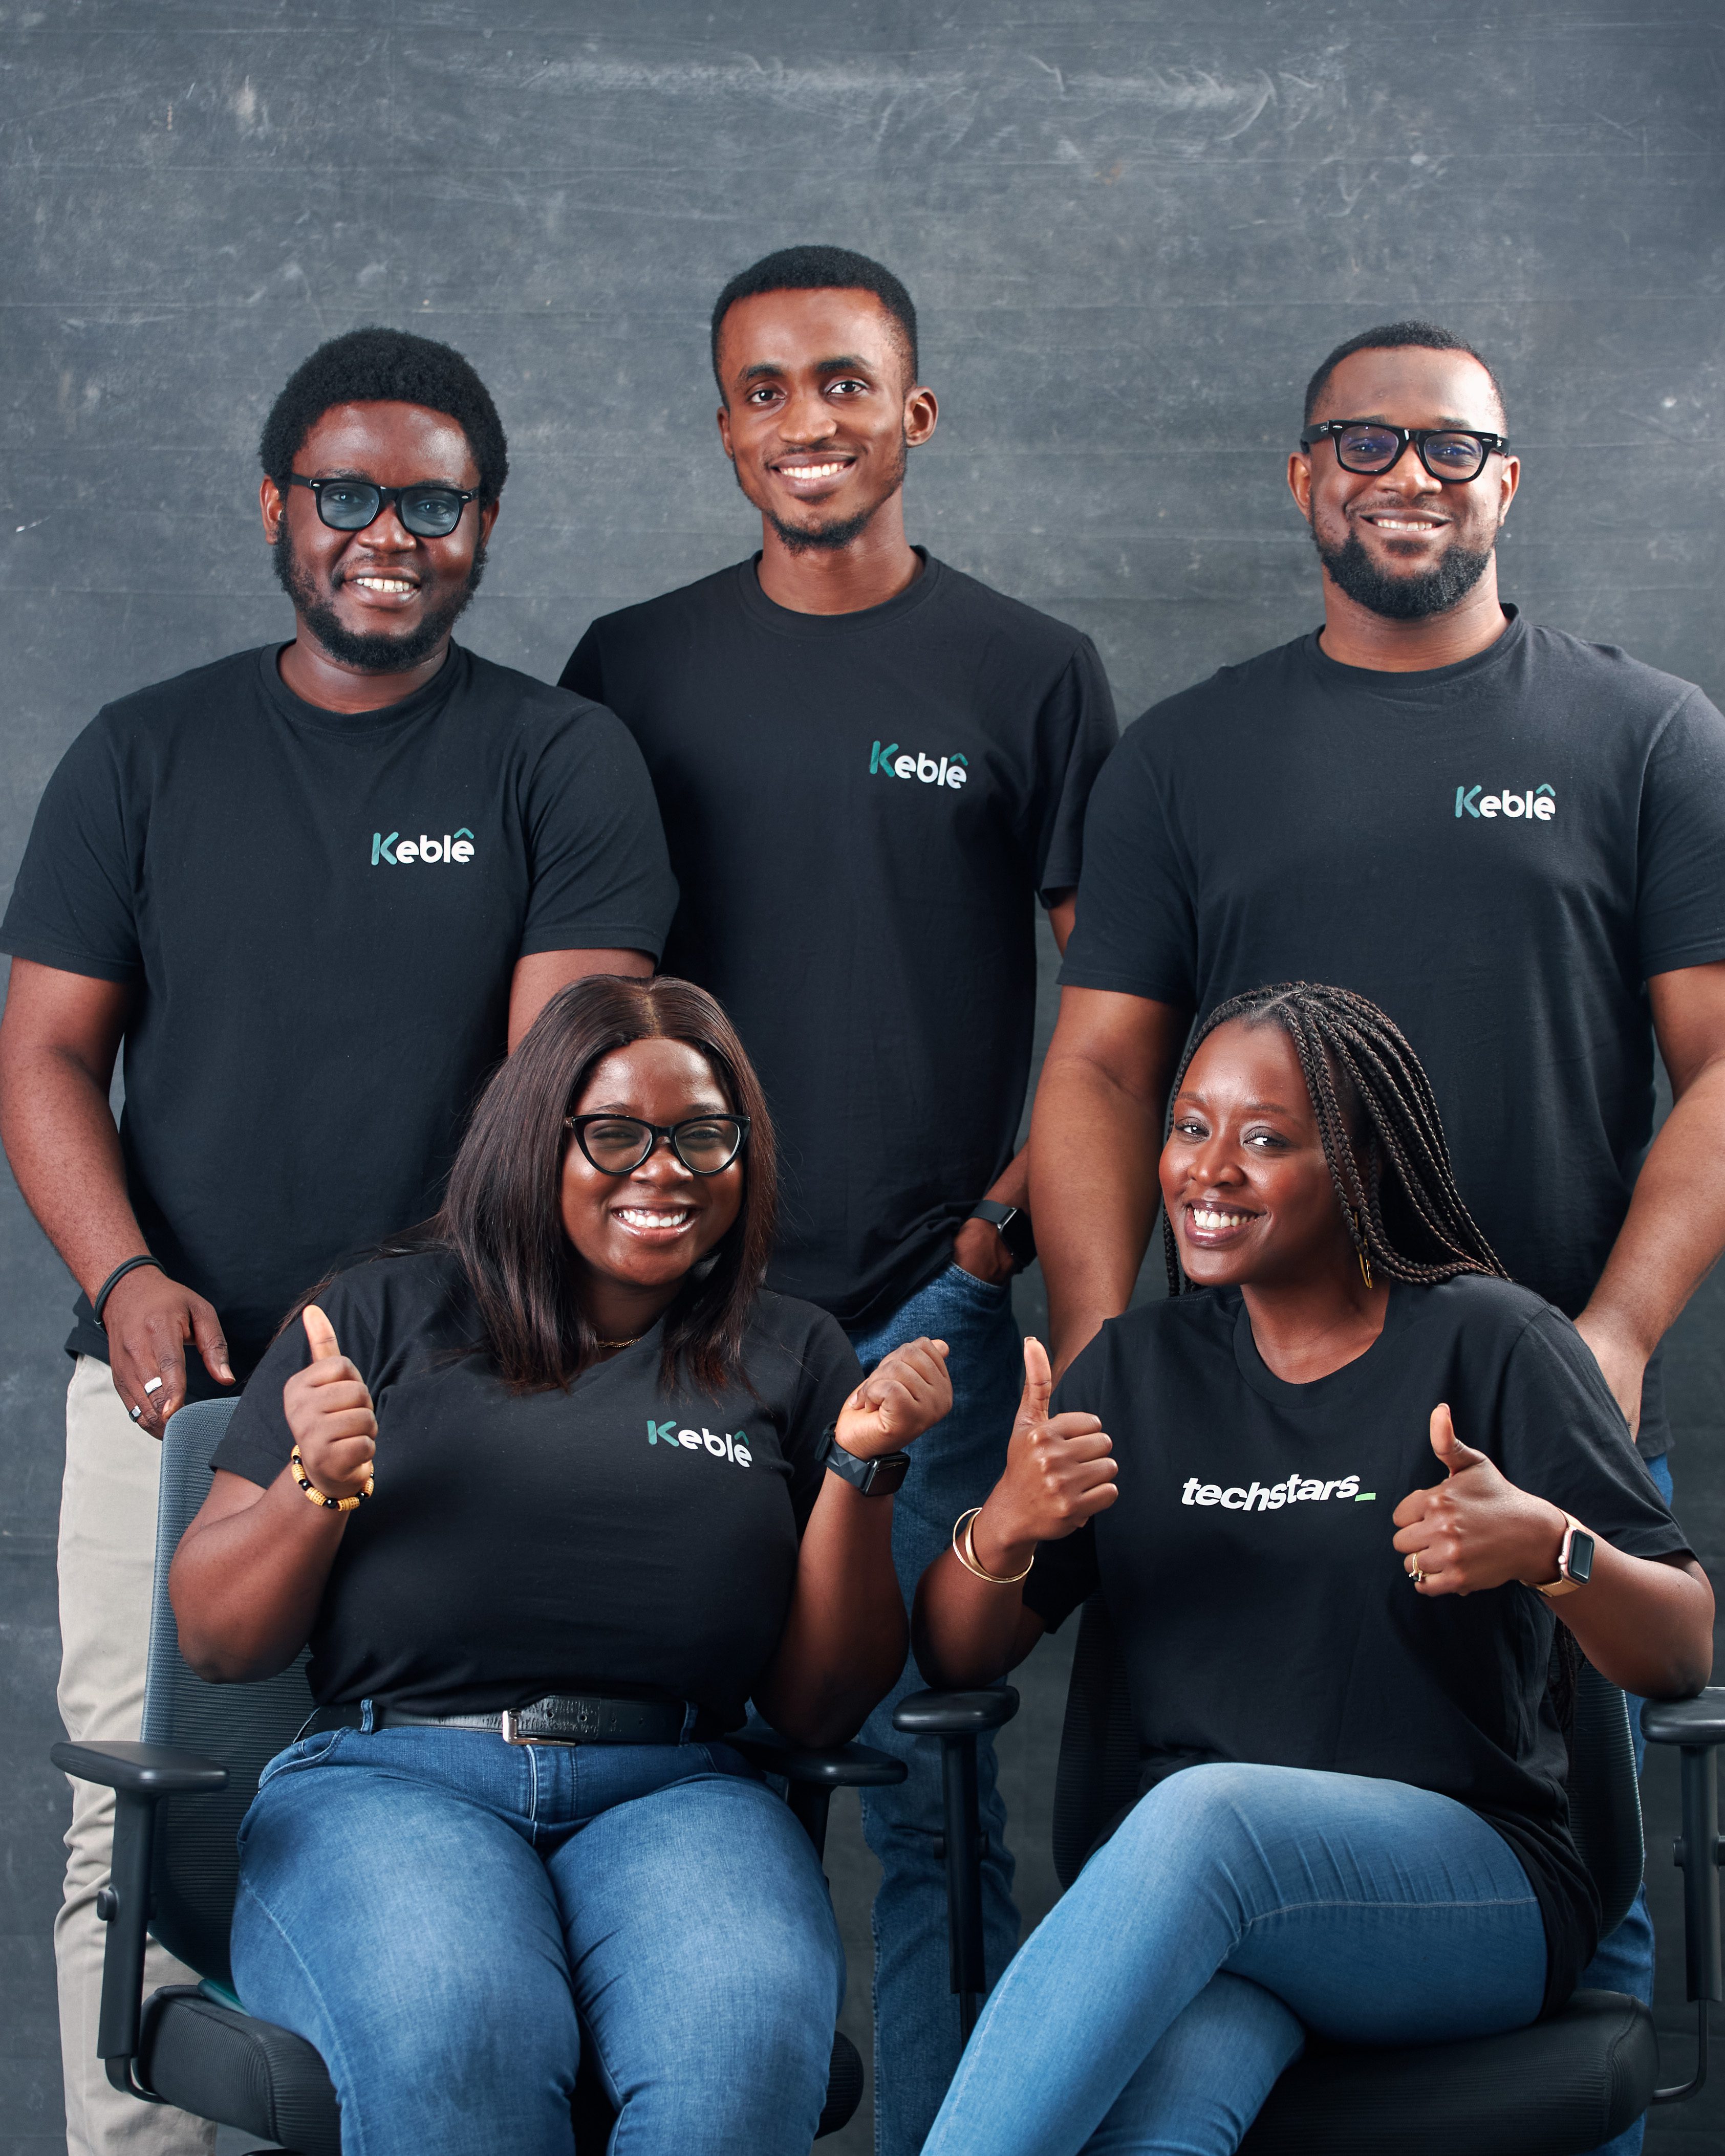 Keble, the fast-growing startup enabling Africans to invest in global real estate with as little as $10